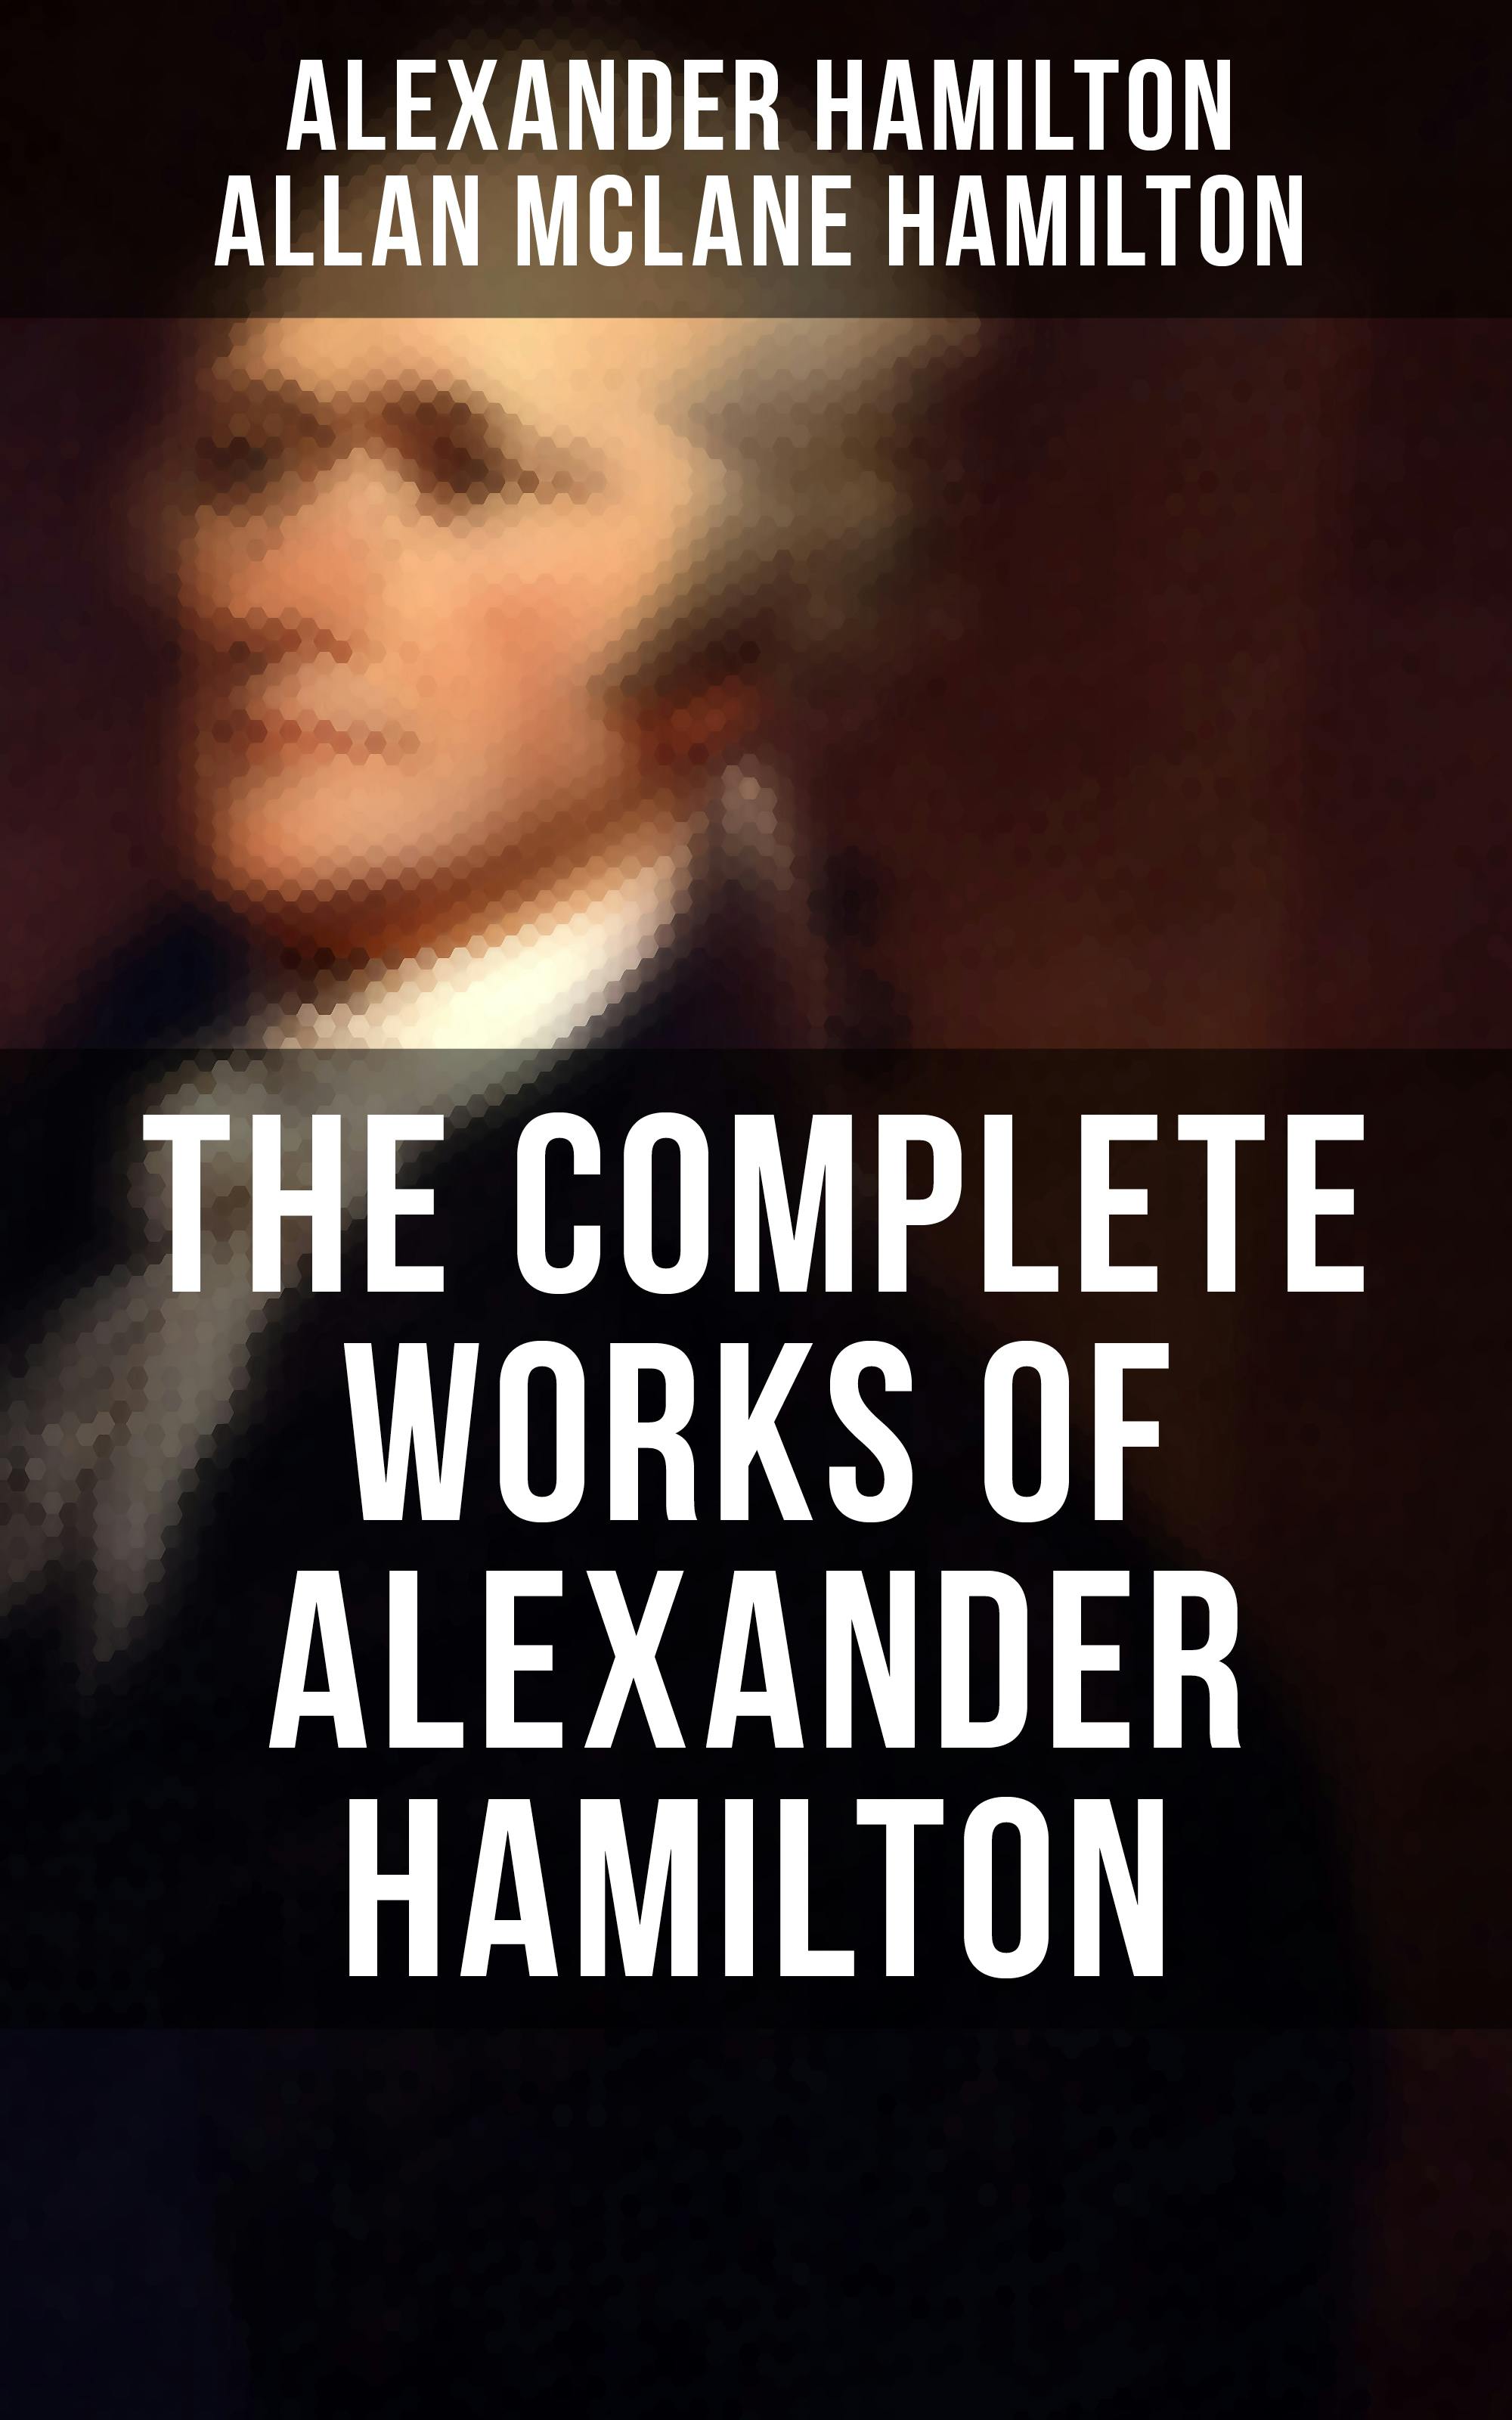 THE COMPLETE WORKS OF ALEXANDER HAMILTON: The Federalist Papers, The Continentalist, A Full Vindication, Publius, The Pacificus, Biography… - Allan McLane Hamilton, Alexander Hamilton